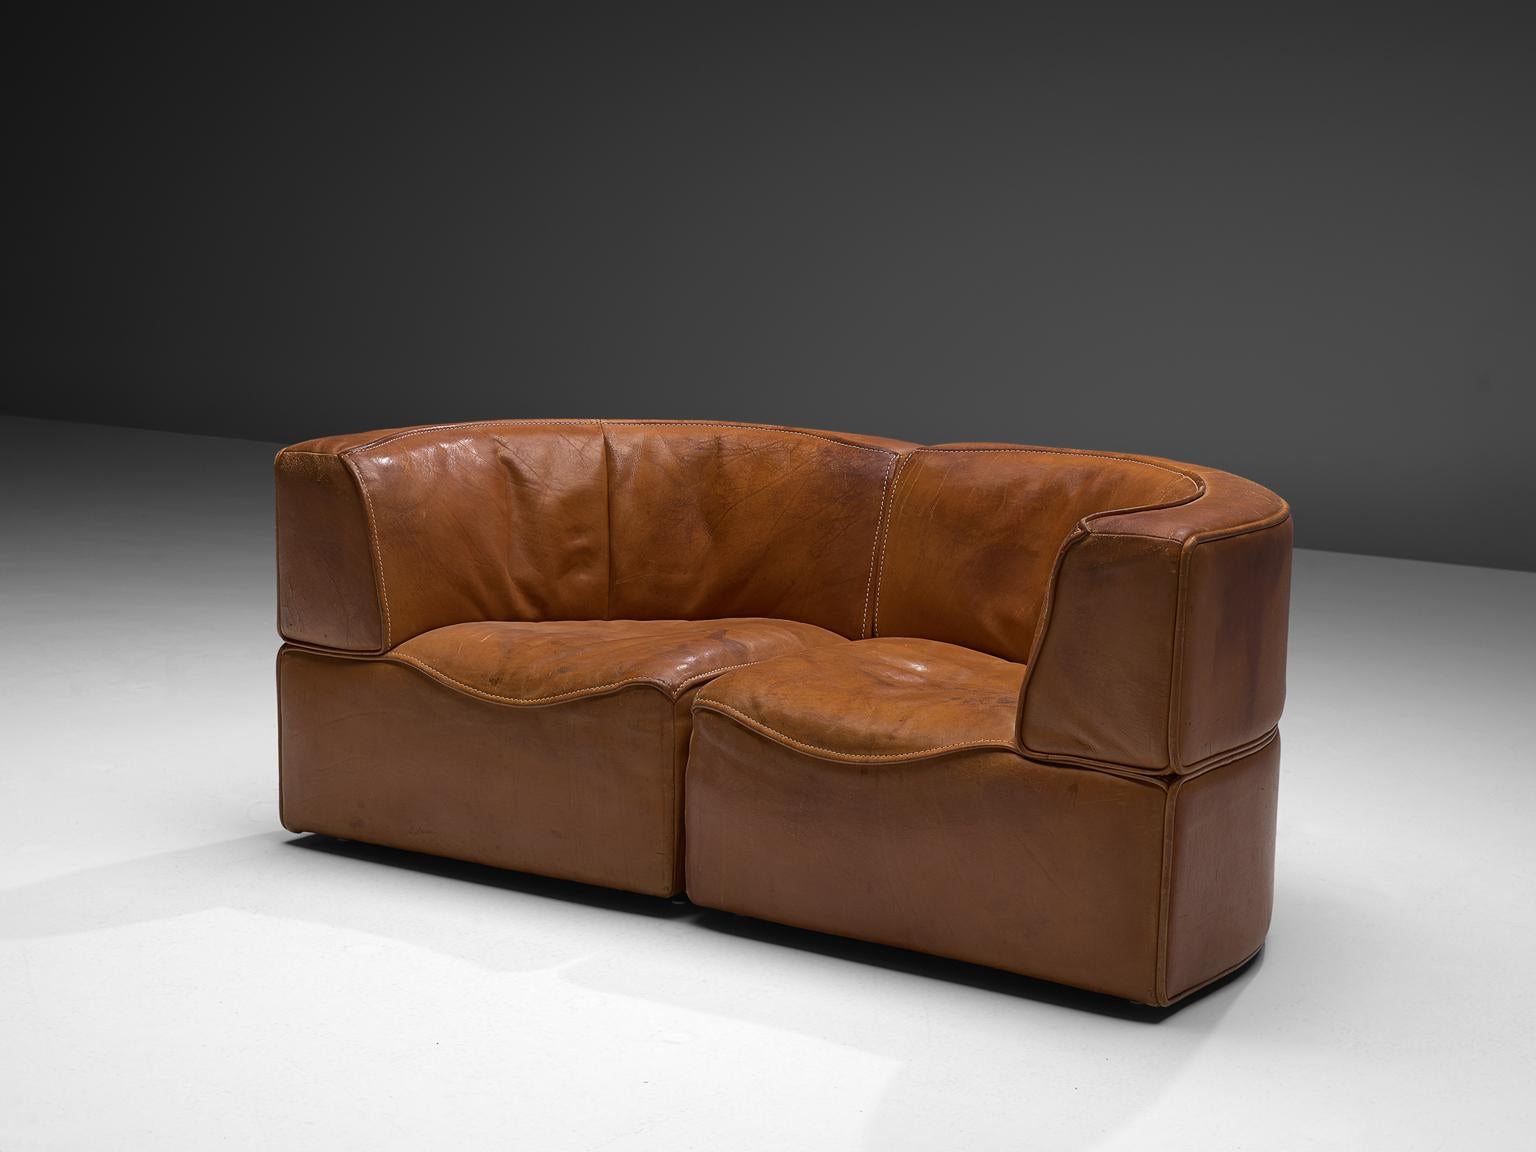 De Sede, sectional sofa model DS-15, cognac leather, Switzerland, 1970s. 

This high quality sectional sofa contains two corner elements. The design is simplistic yet highly comfortable. The tight back shows a nice line of two levels, the front is